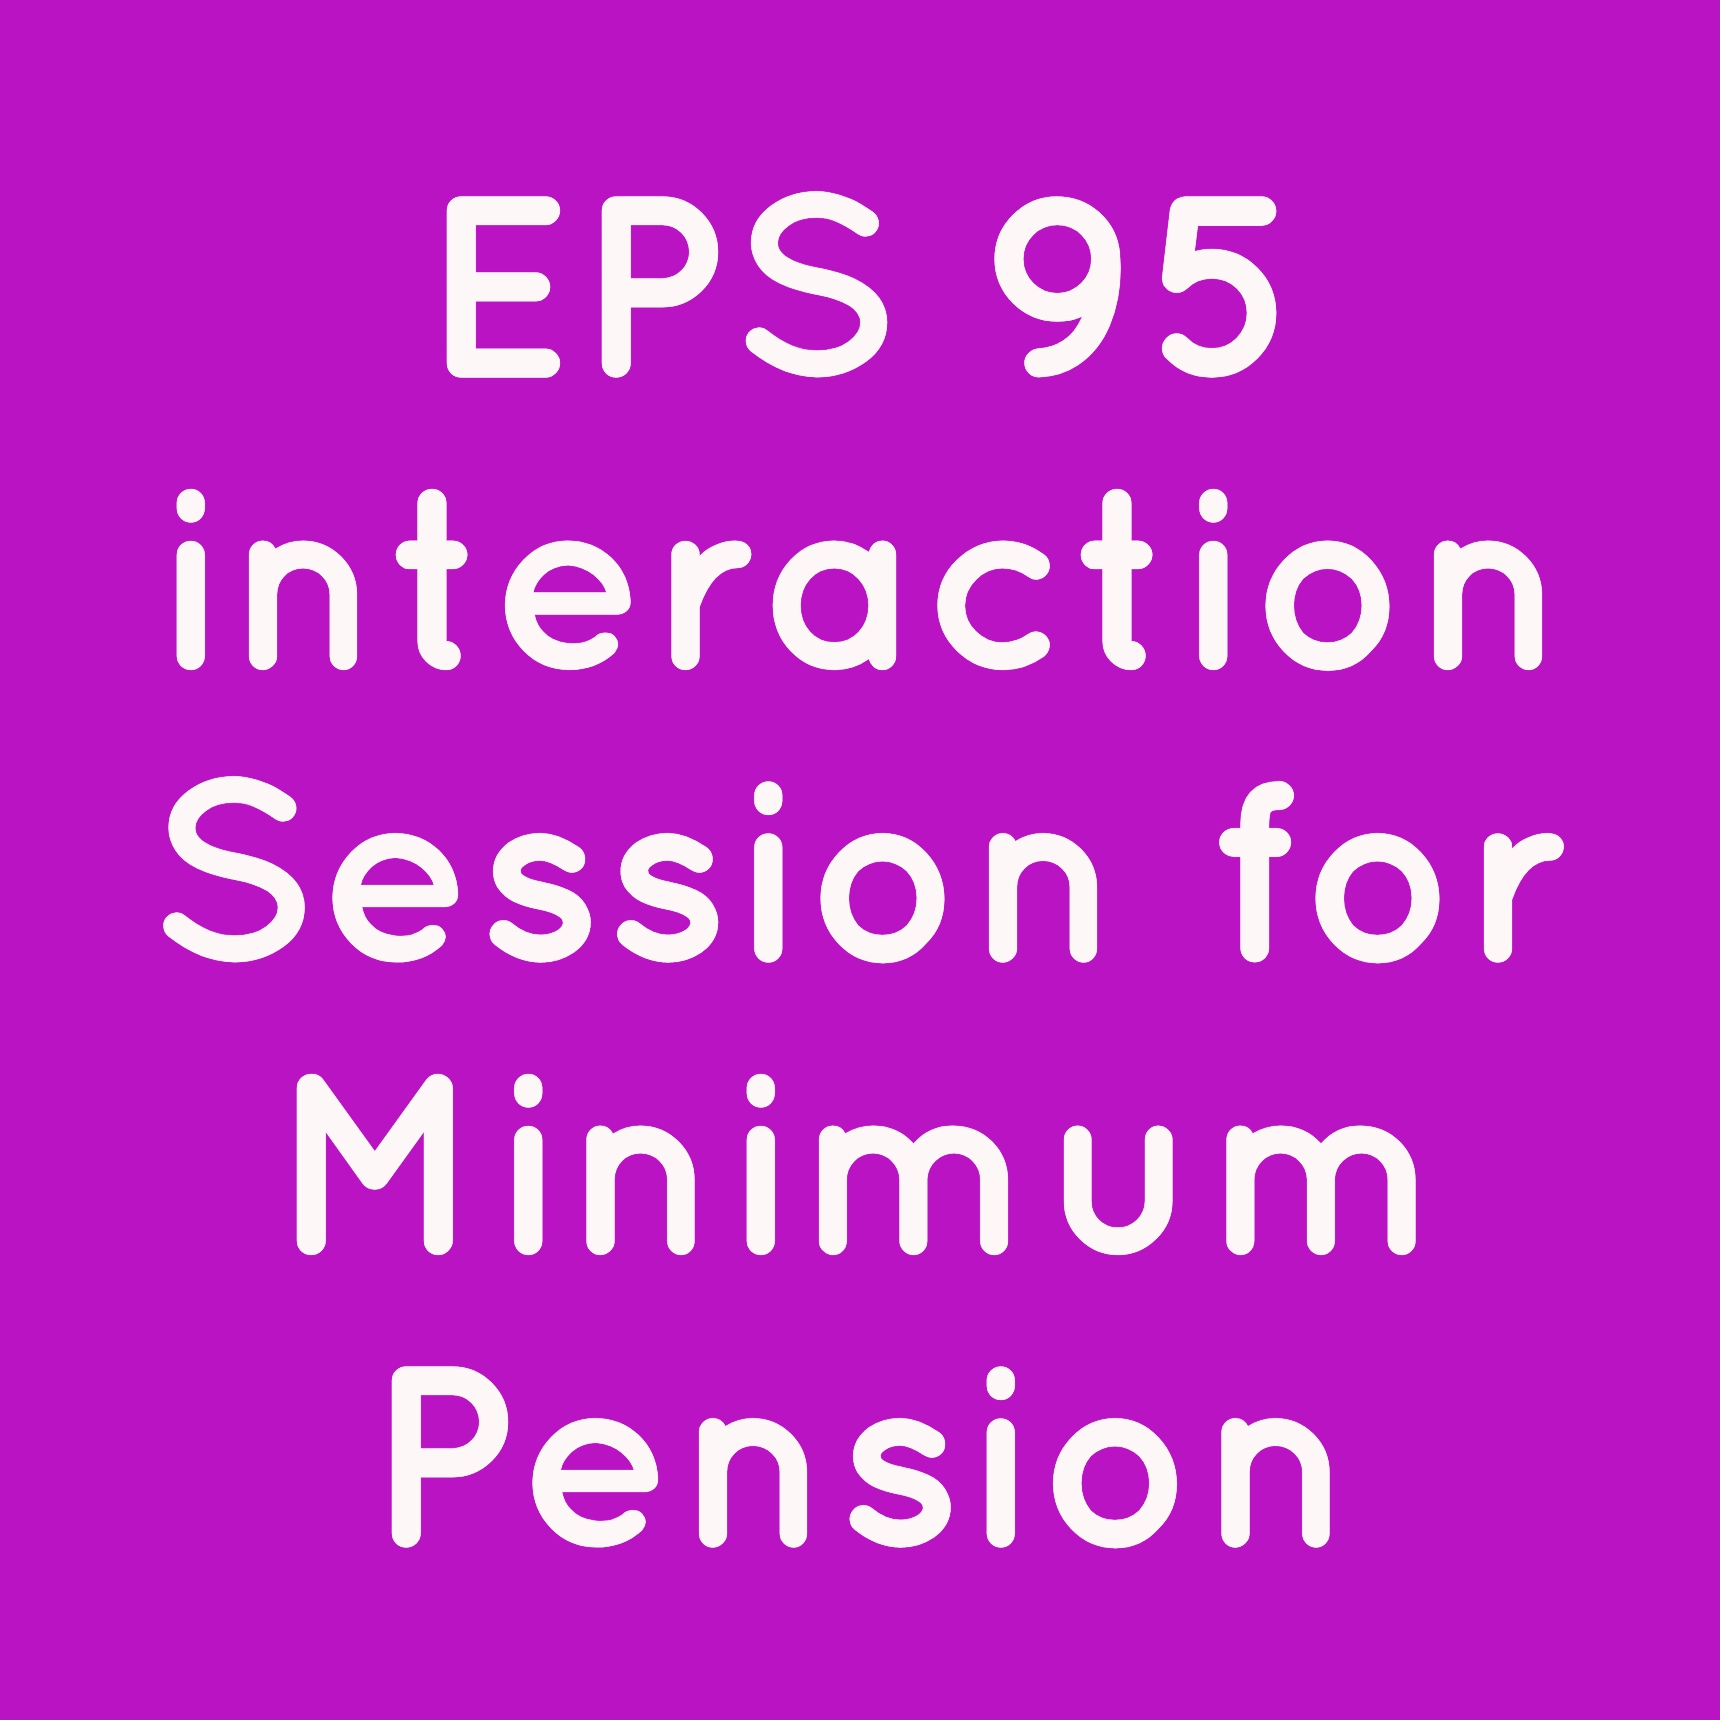 EPS 95 interaction Session for Minimum Pension